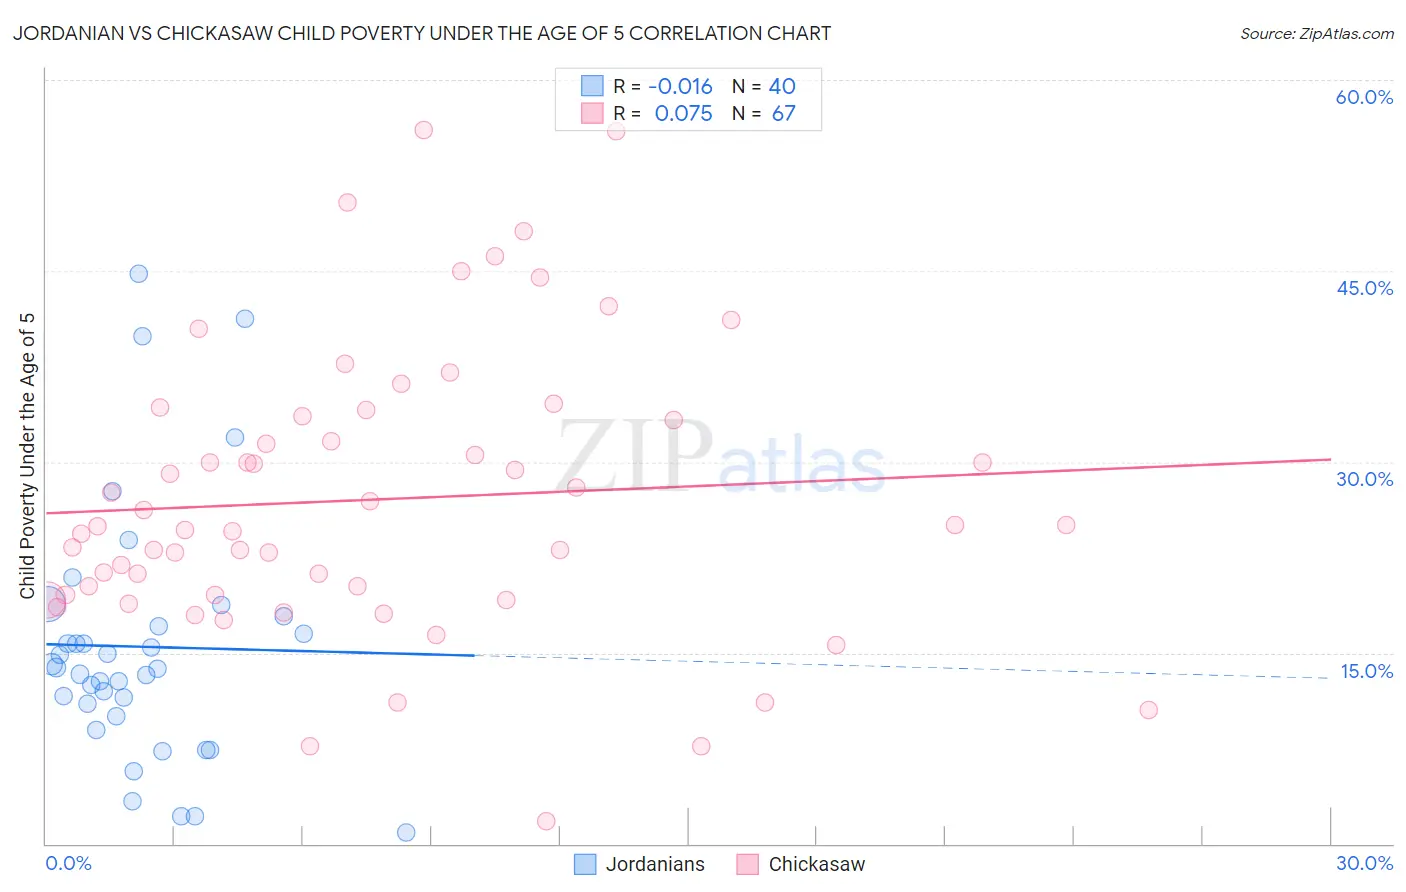 Jordanian vs Chickasaw Child Poverty Under the Age of 5